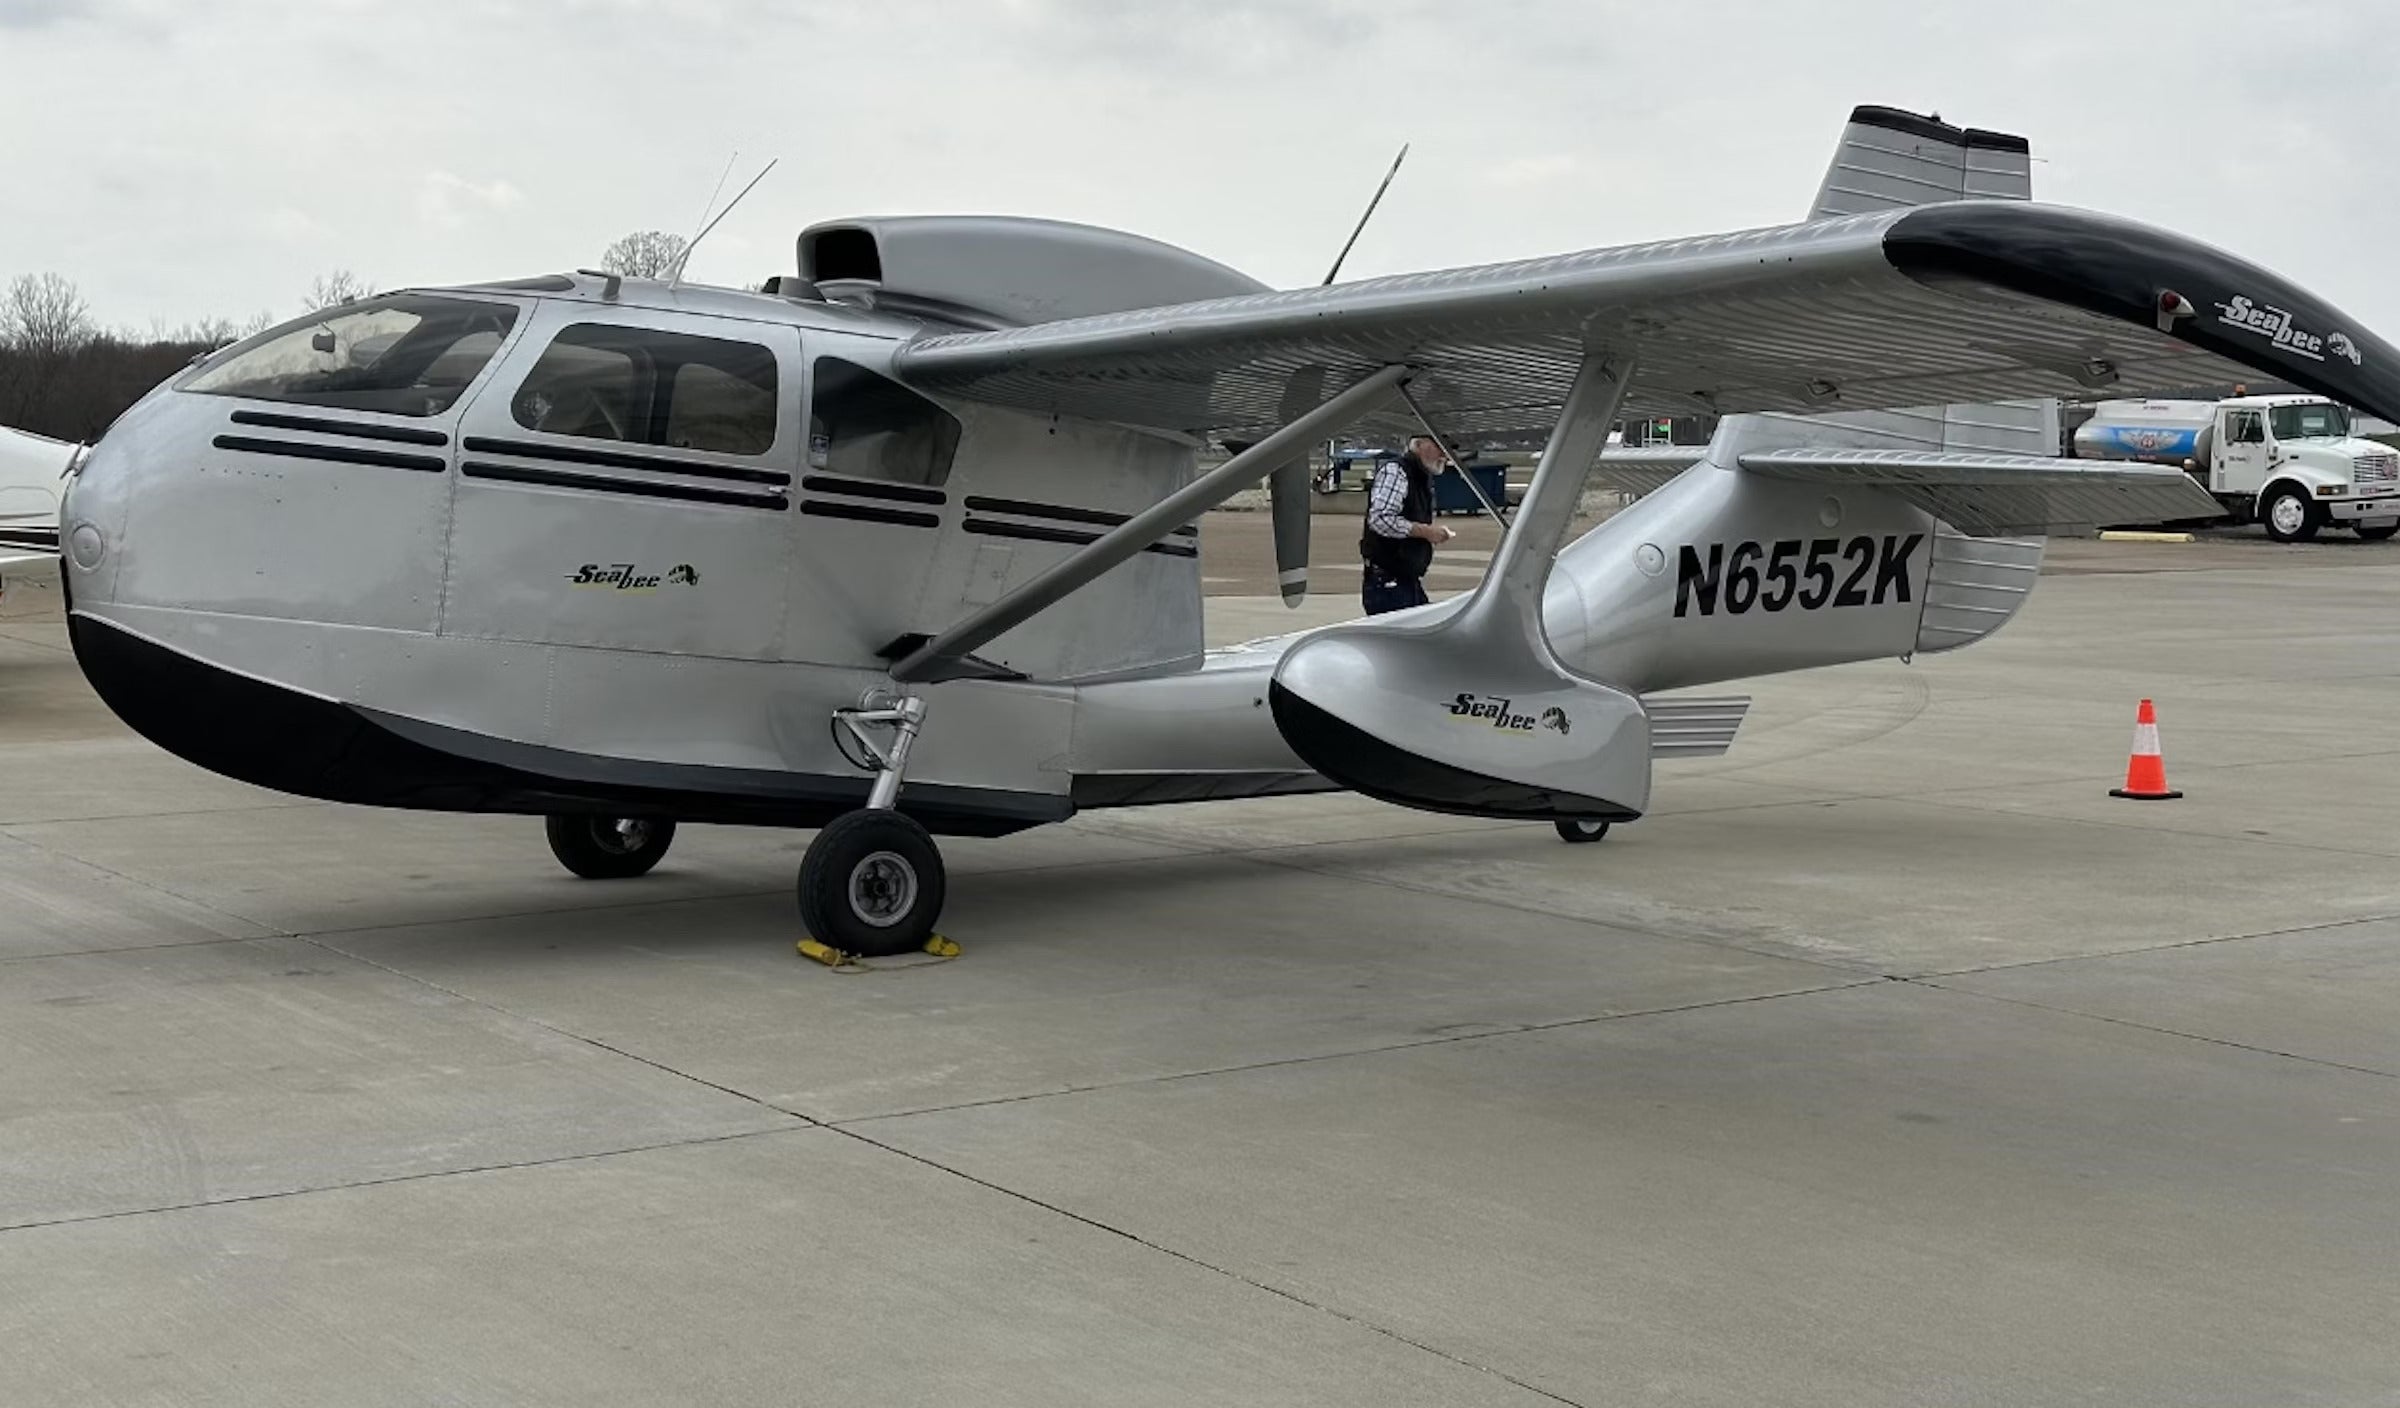 This 1947 Republic RC-3 Seabee Is an Adventure-Seeking ‘AircraftForSale’ Top Pick